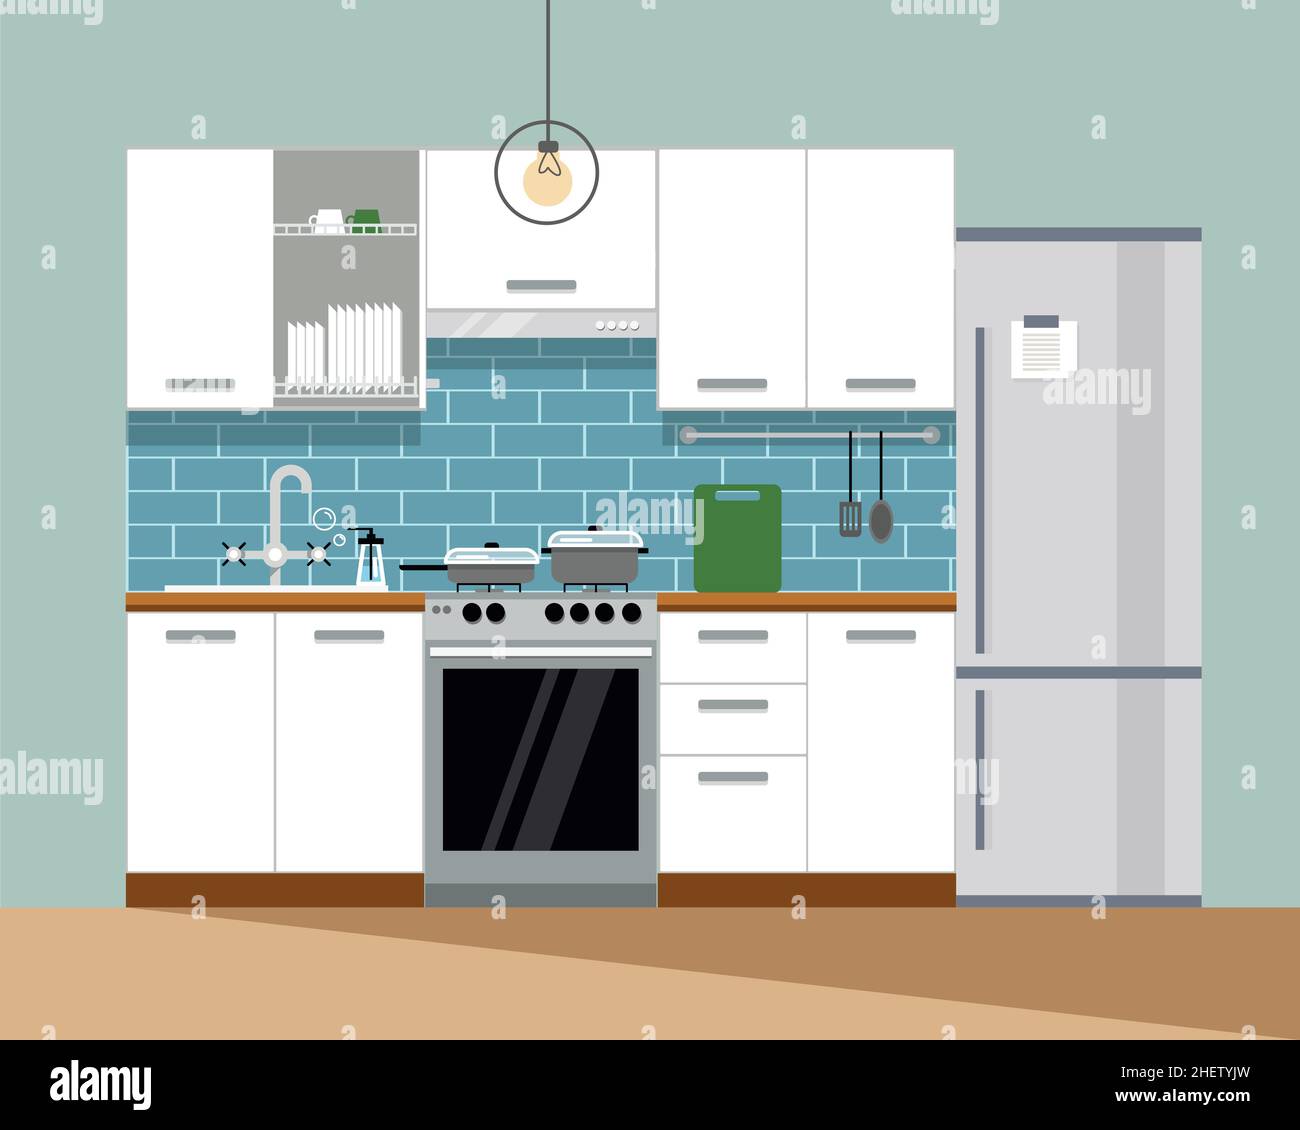 Modern cozy kitchen interior. Furniture and stove, dishes, fridge and utensils. Flat style, vector graphic design template. Stock Vector